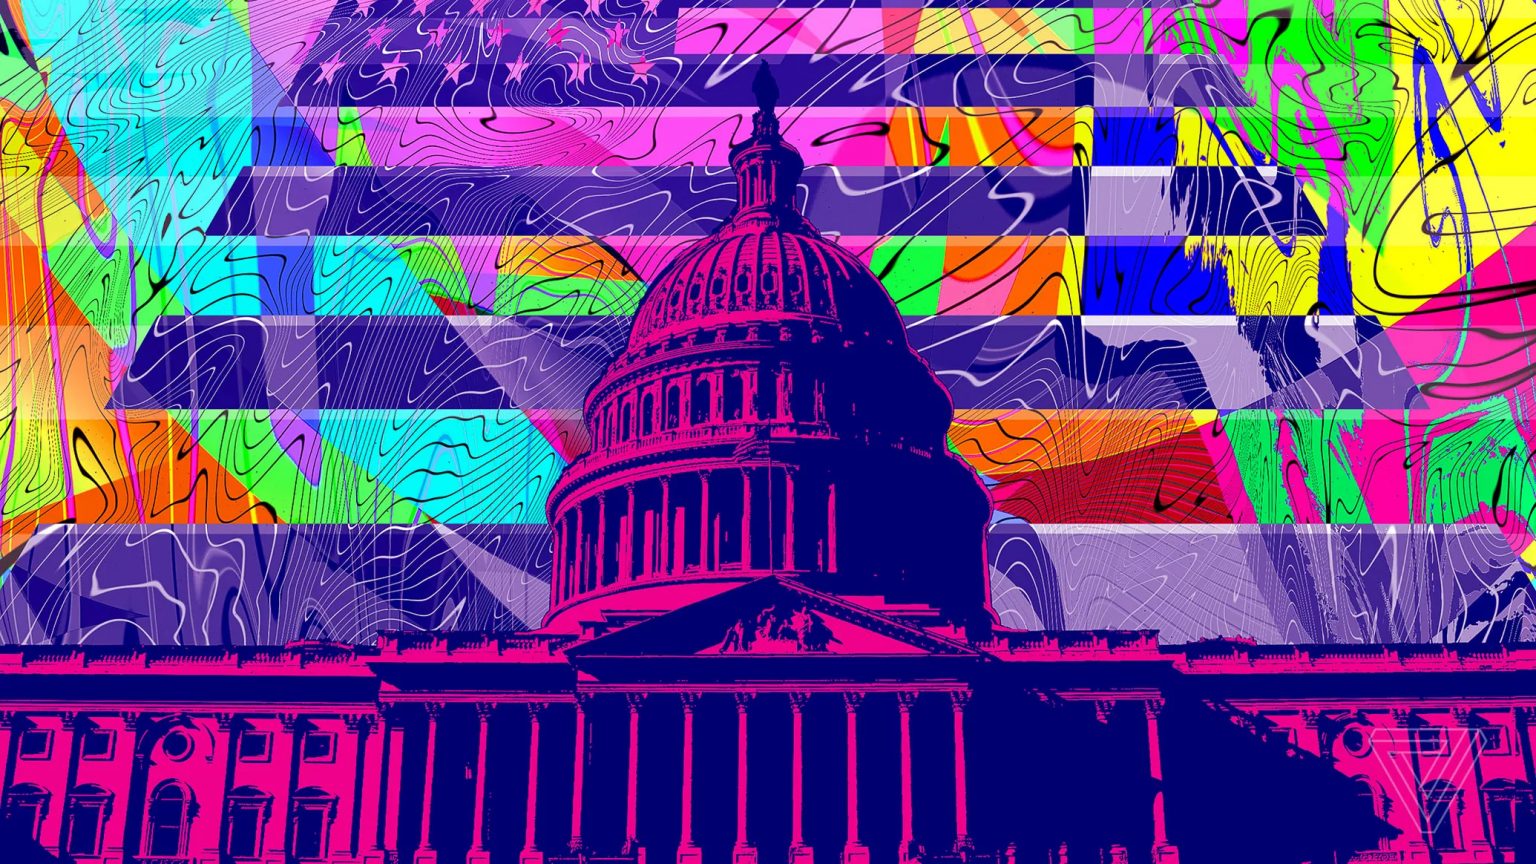 psychedelic-capitol-by-acastro-1536x864.jpg